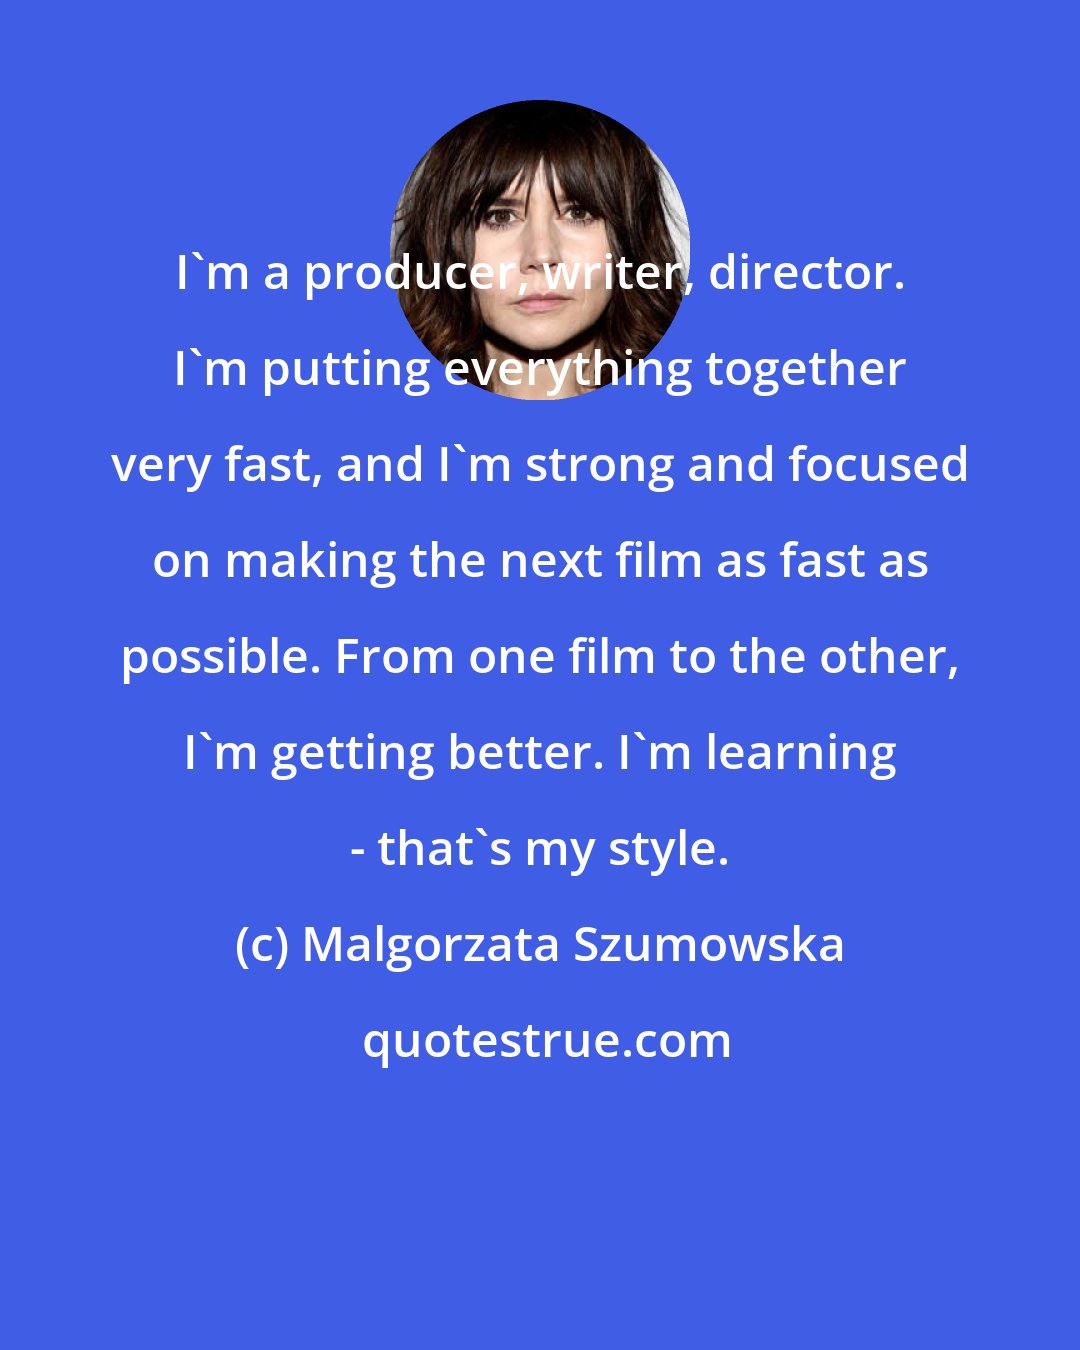 Malgorzata Szumowska: I'm a producer, writer, director. I'm putting everything together very fast, and I'm strong and focused on making the next film as fast as possible. From one film to the other, I'm getting better. I'm learning - that's my style.